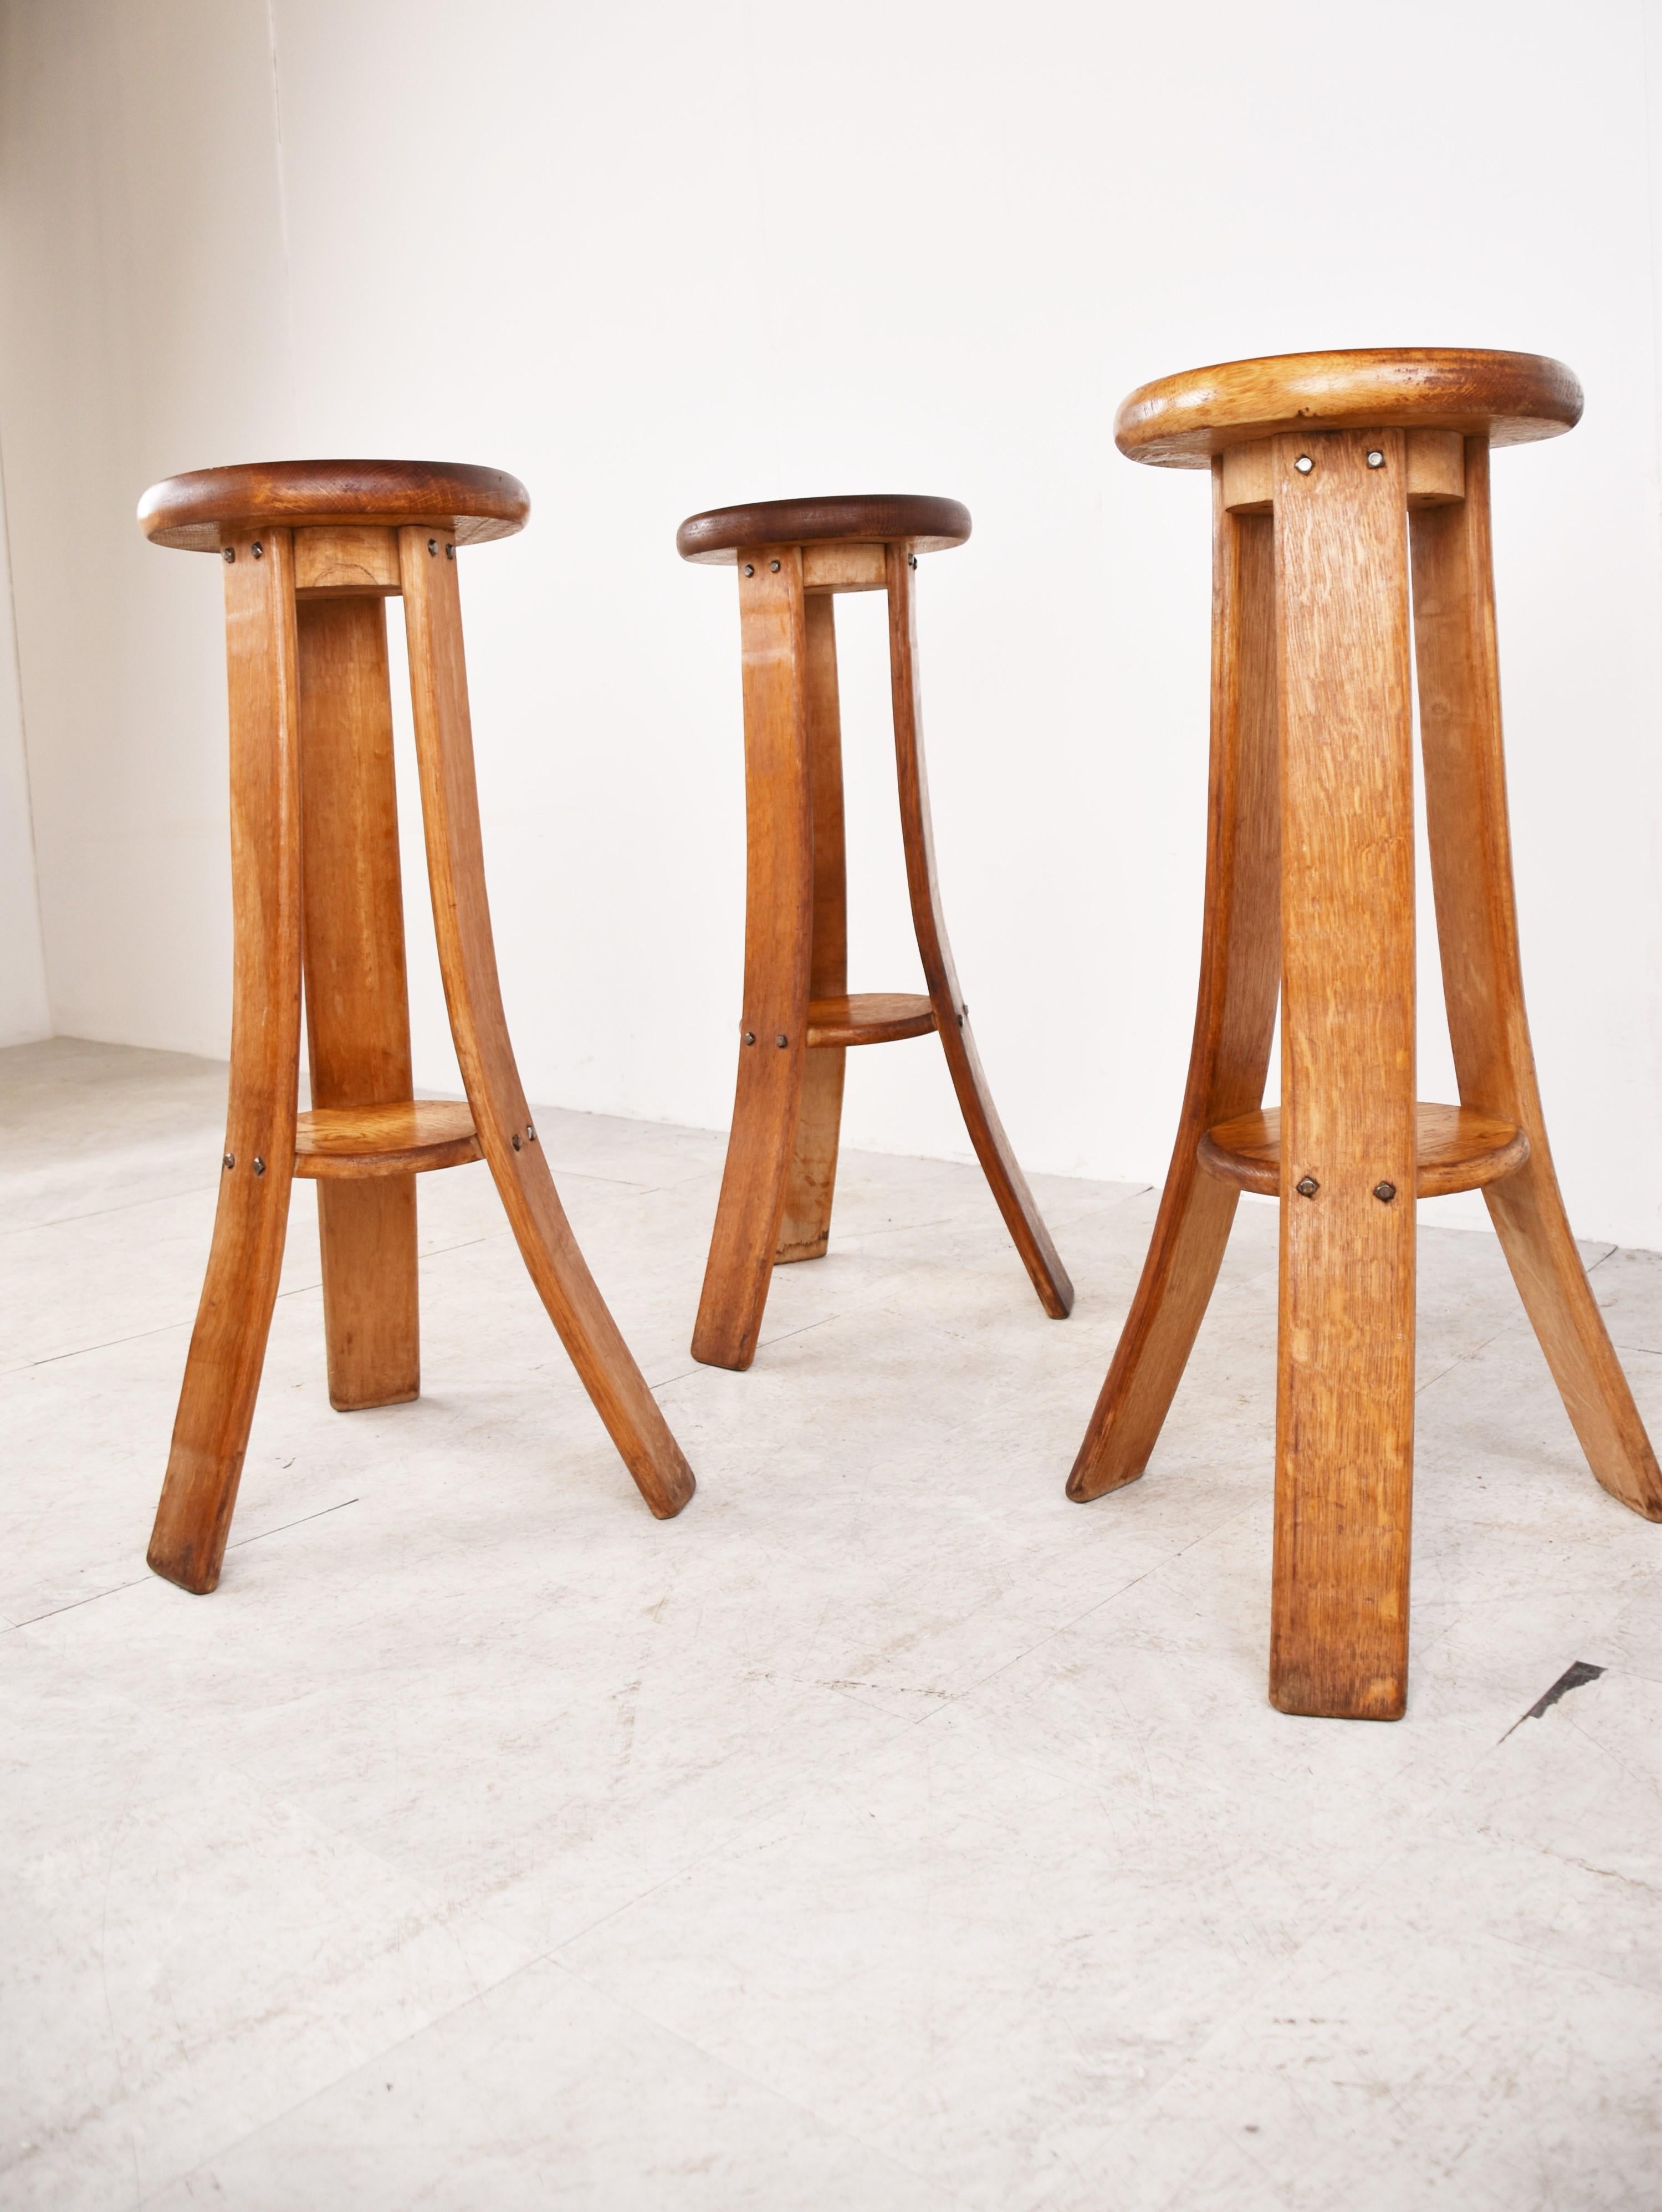 Attractive hand crafted brutalist bar stools.

Beautiful tripod bentwood base and a round seat.

Made from oak. 

Good original condition.

1960s - Germany

Dimensions:
Width: 46cm/18.11